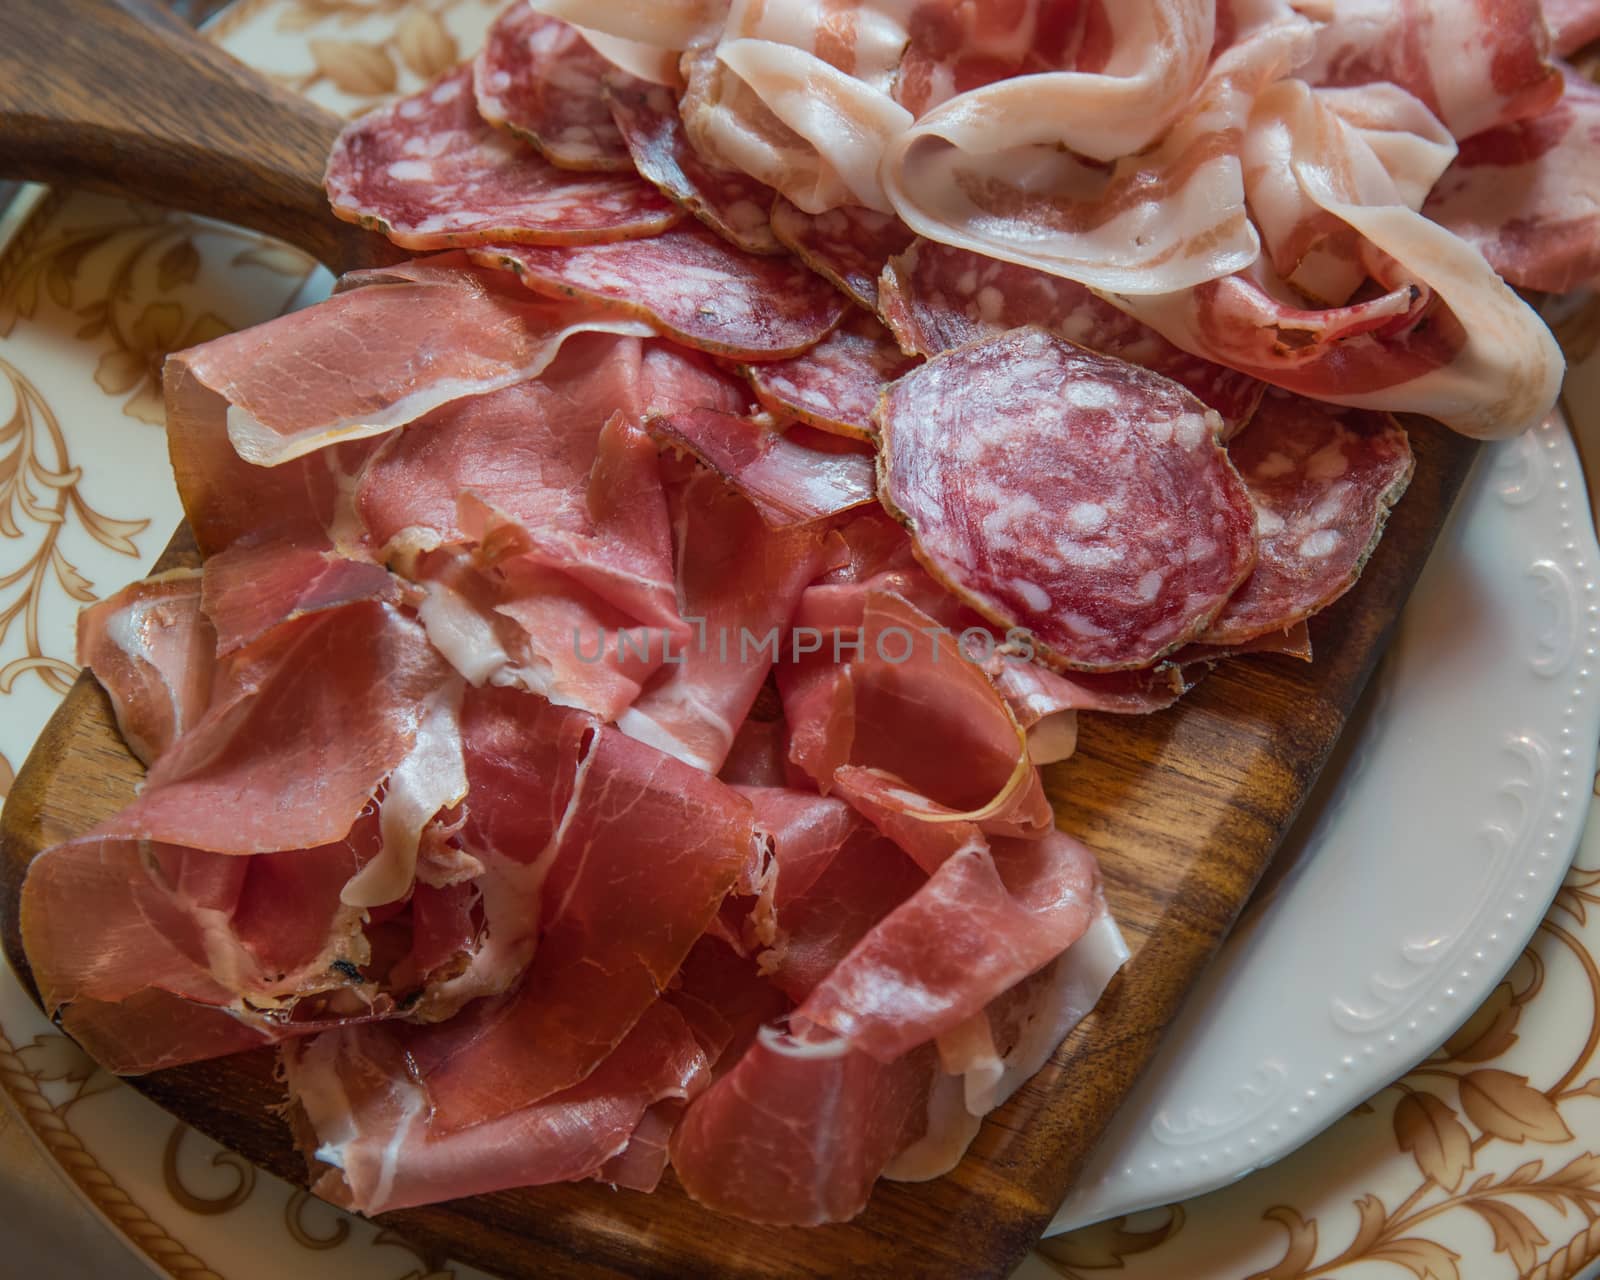 Typical italian salami from above by Robertobinetti70